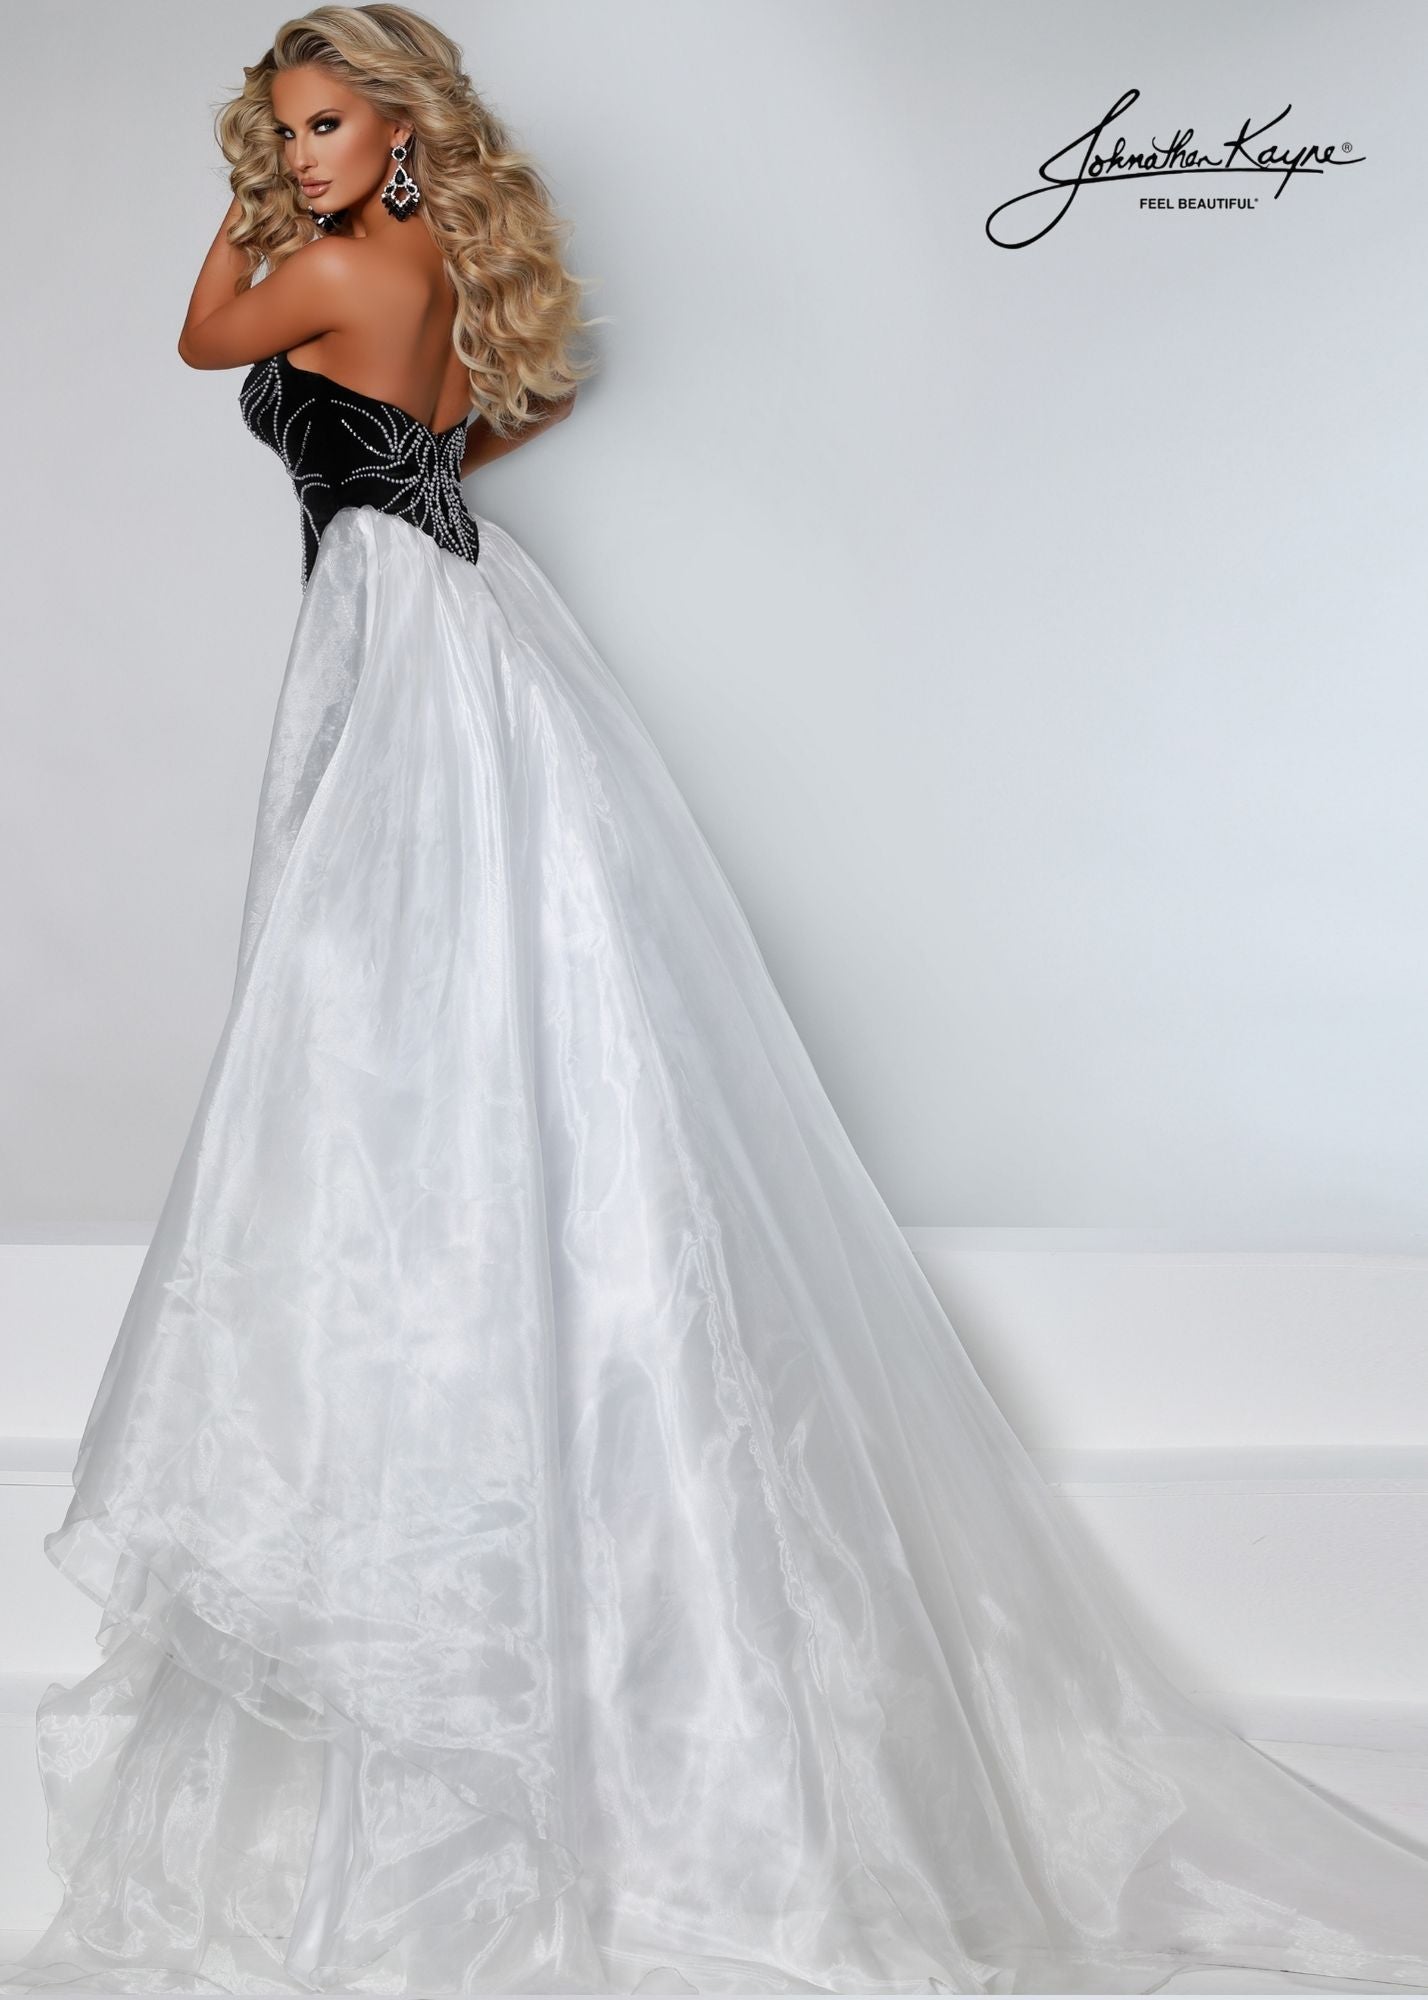 Johnathan-Kayne-2555-Black-White-Pageant-Gown-strapless-plunging-neckline-embellished-velvet-fitted-evening-dress-with-full-organza-overskirt-back